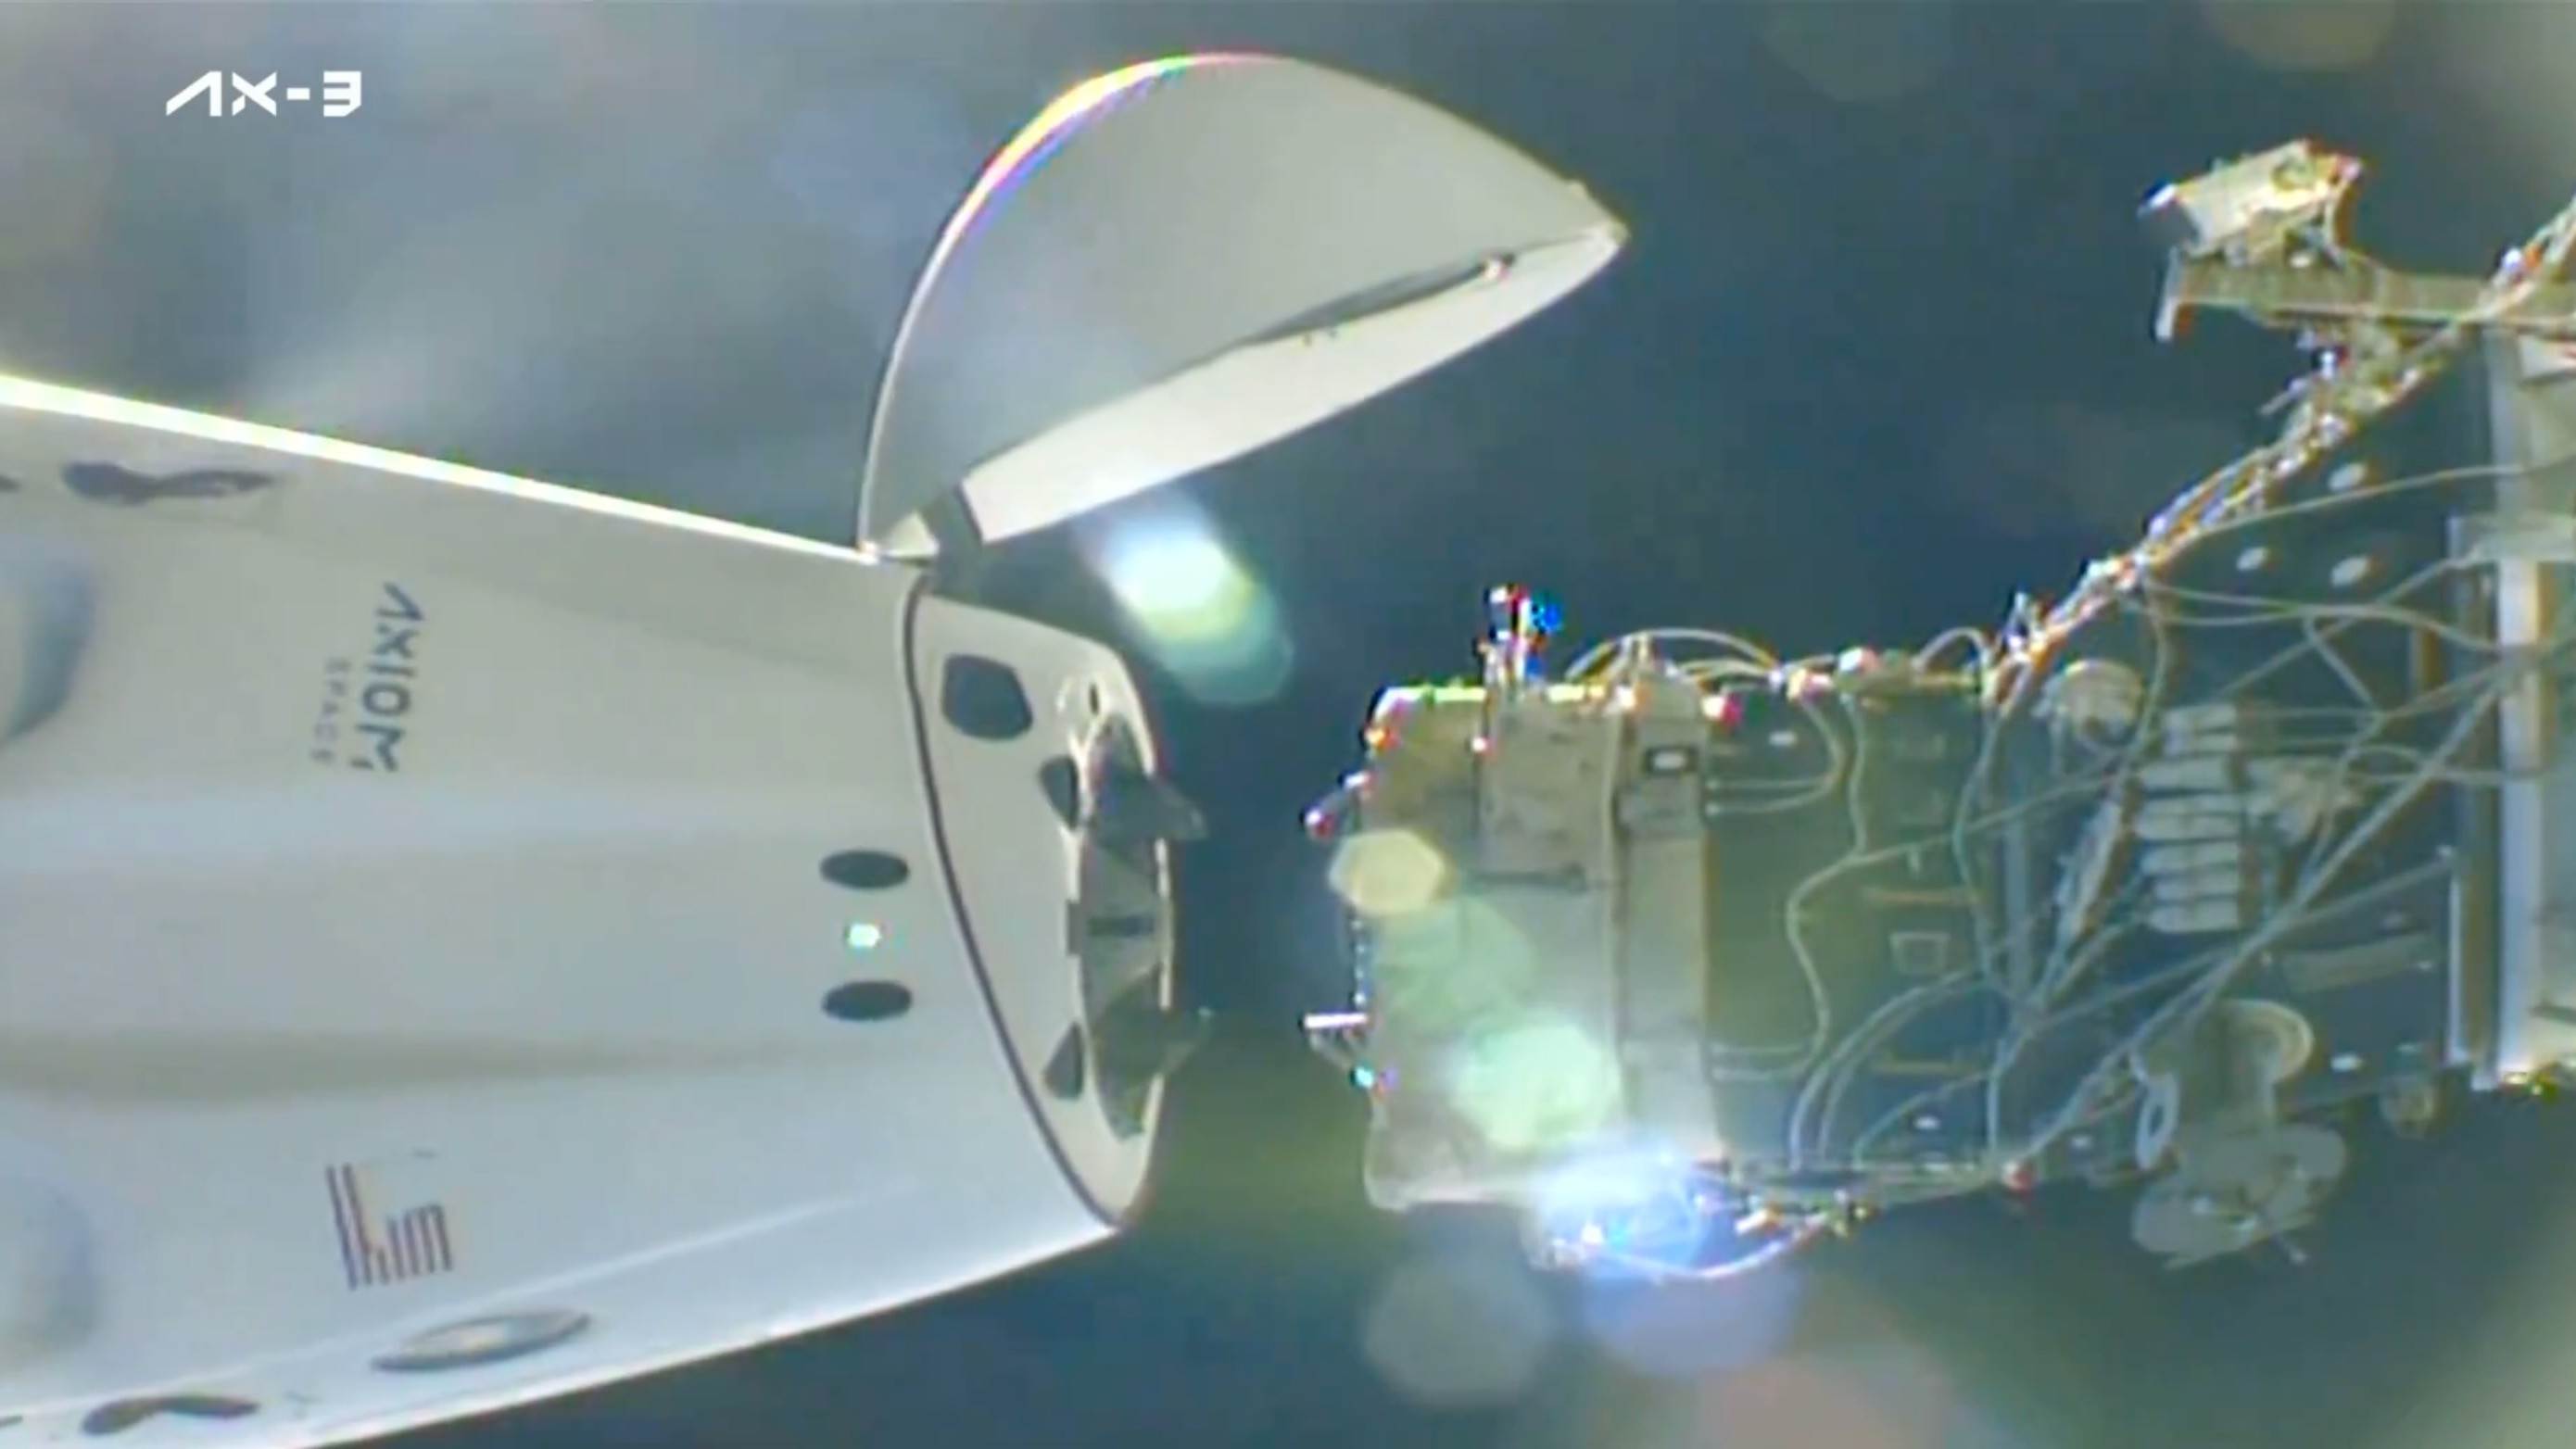 Watch private Ax-3 astronauts return to Earth in SpaceX capsule on Feb. 9 (video)